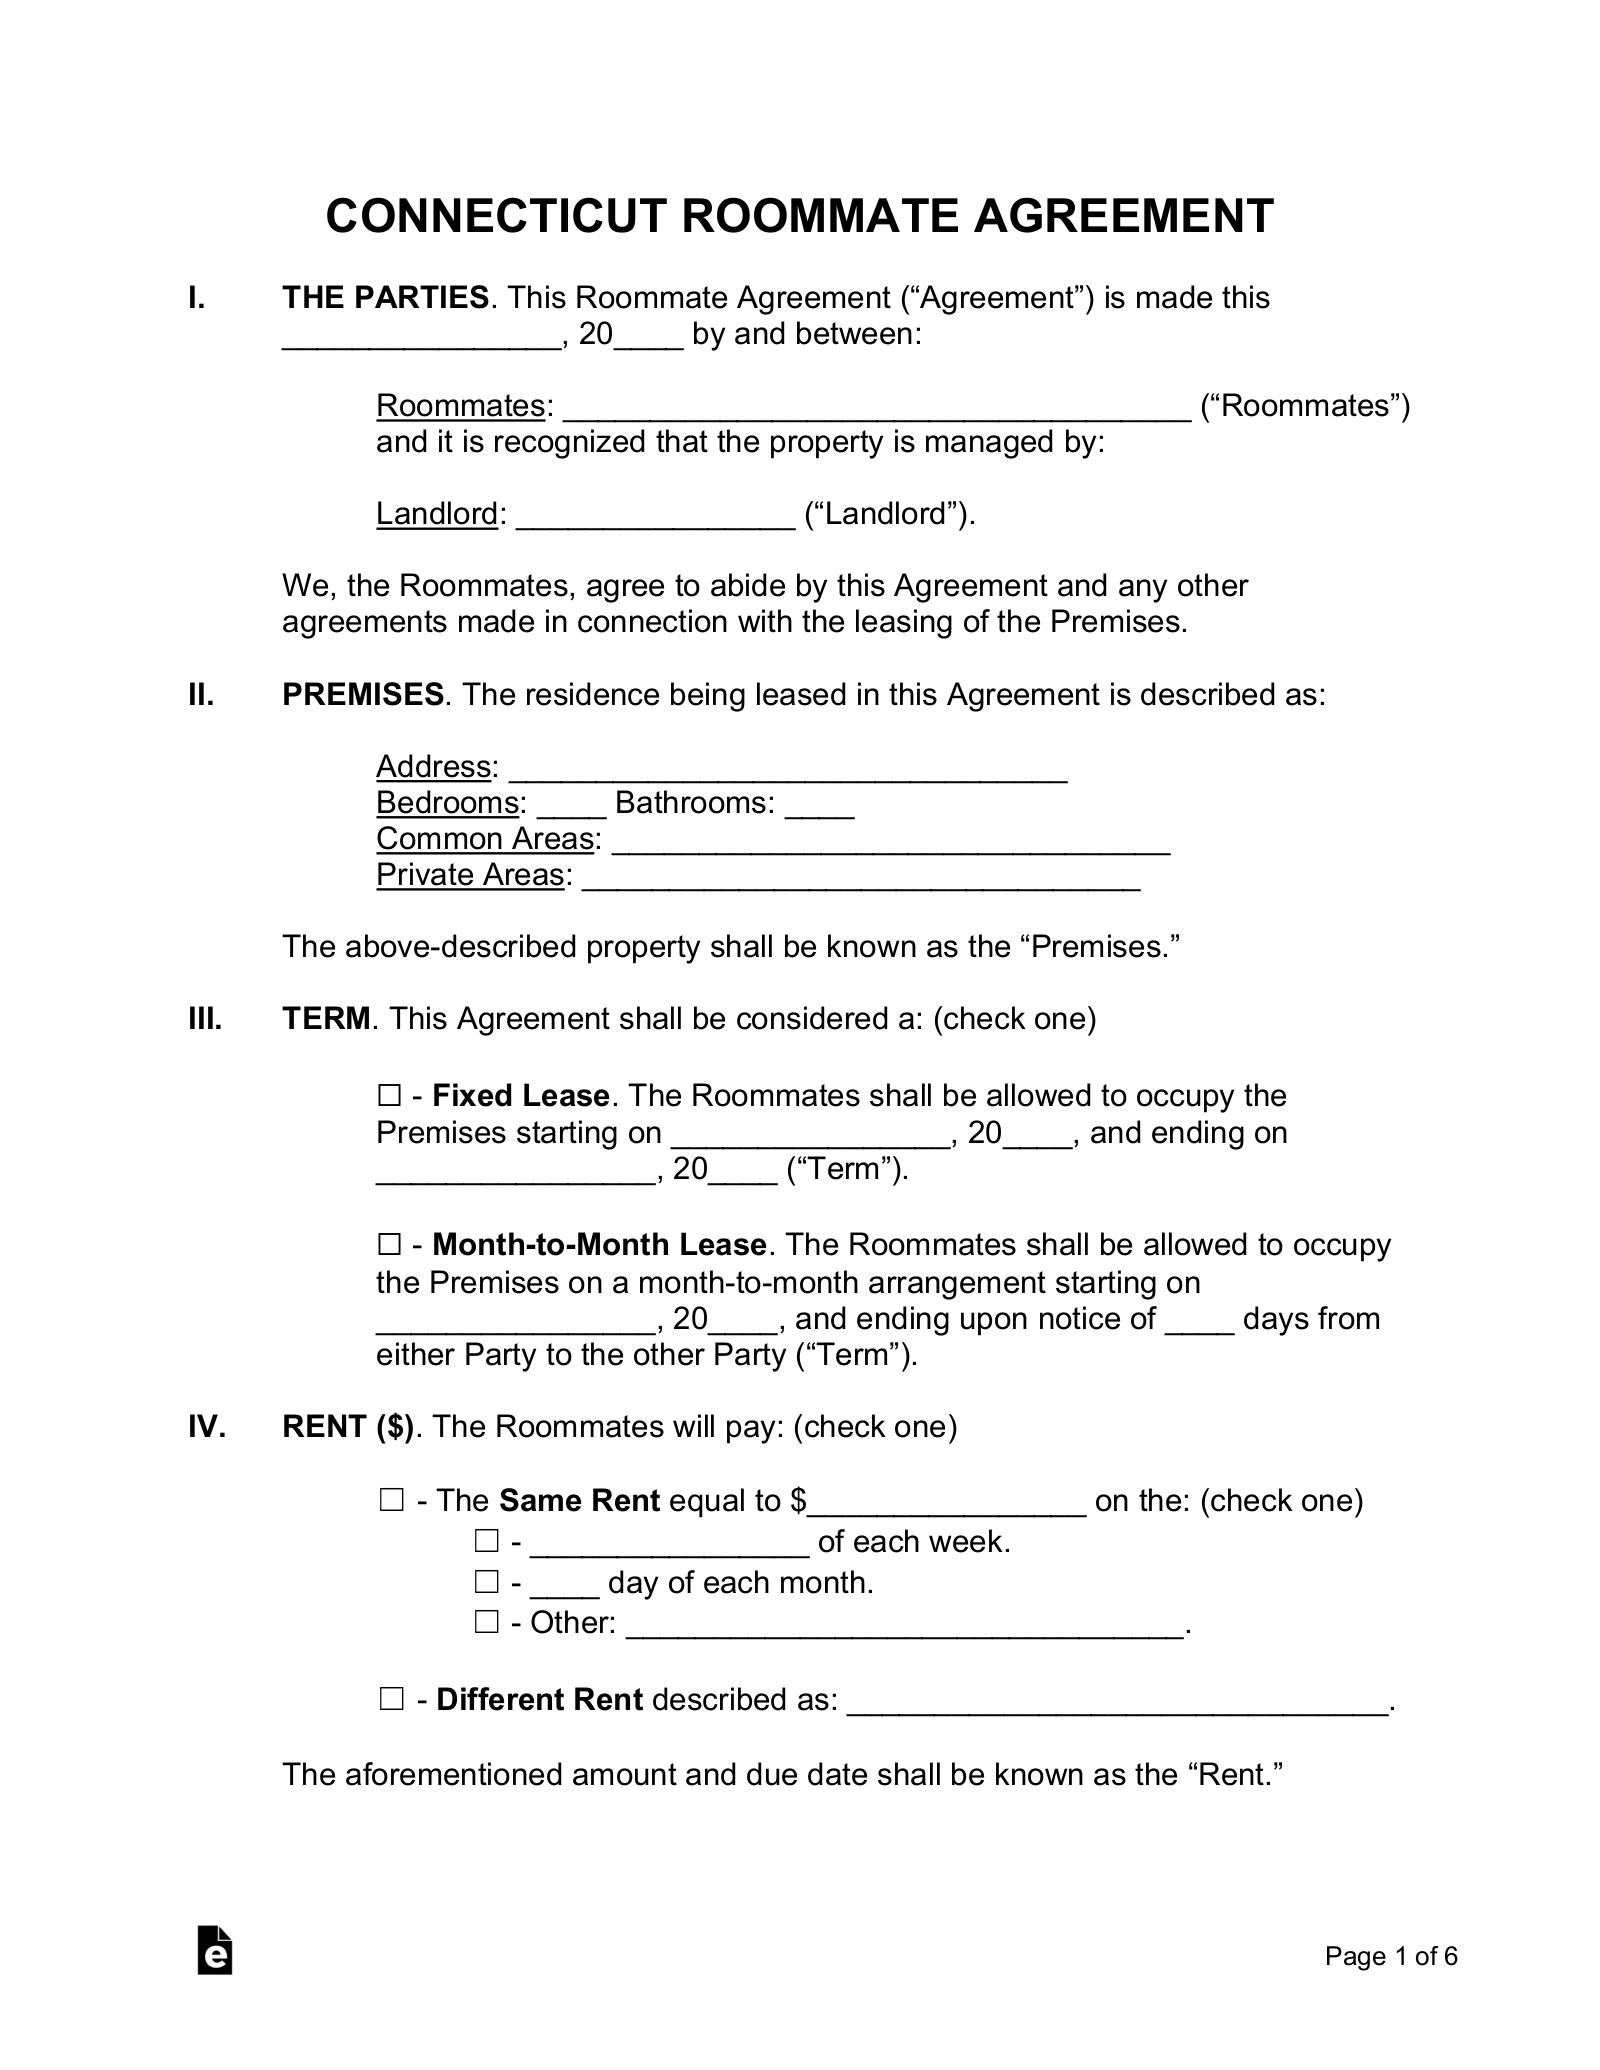 free-connecticut-roommate-agreement-template-pdf-word-eforms